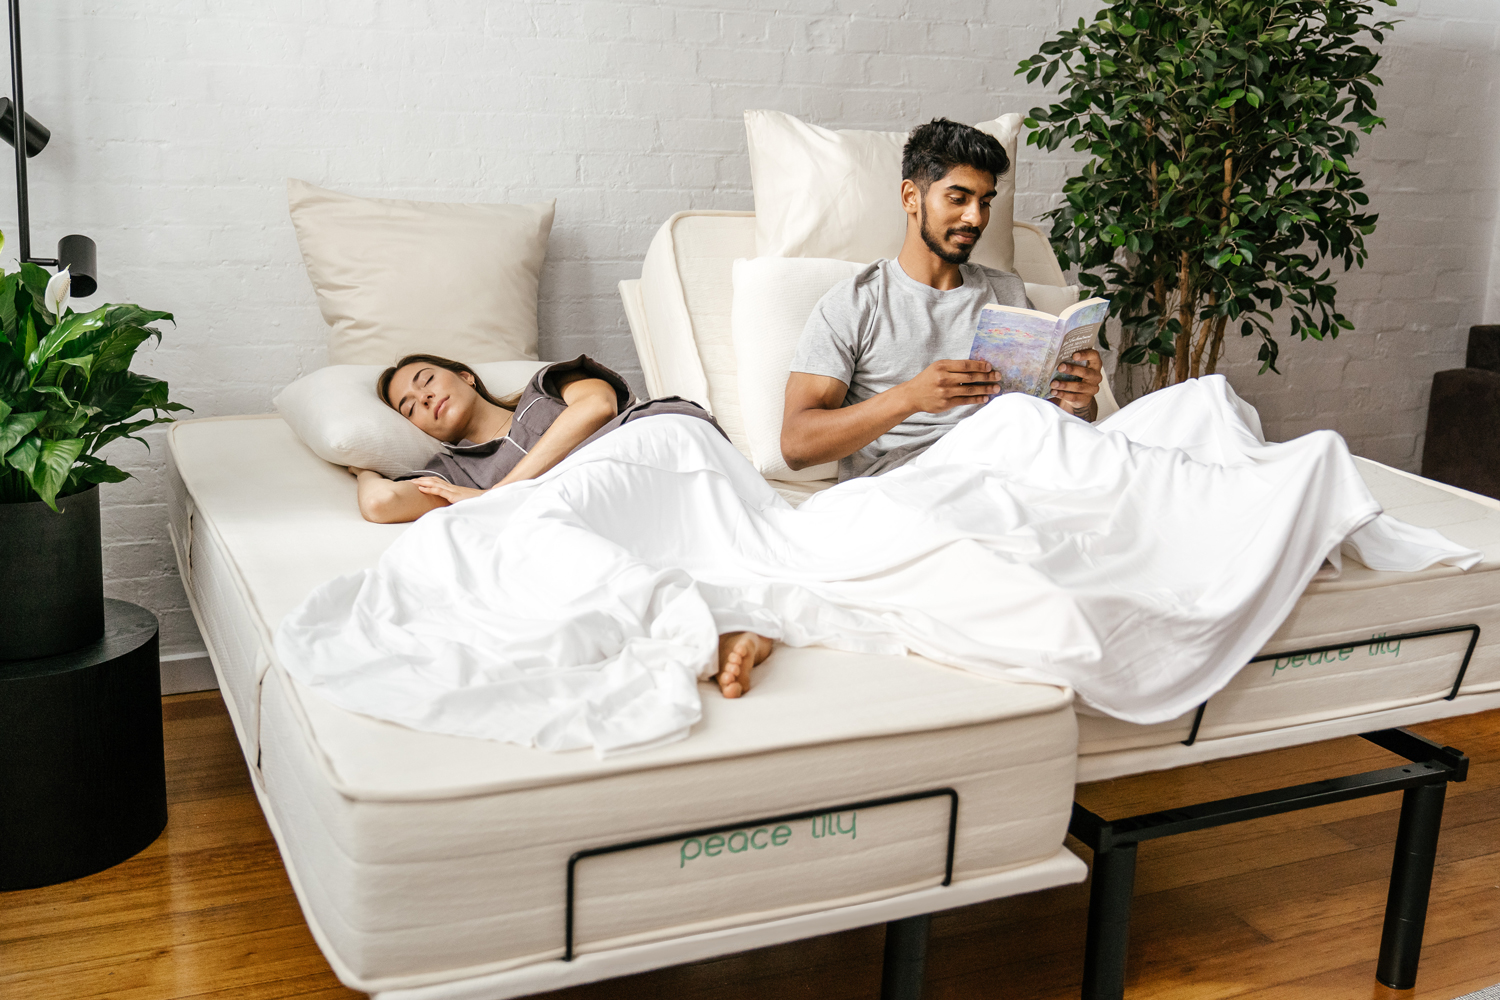 Peace lily Adjustable Bed